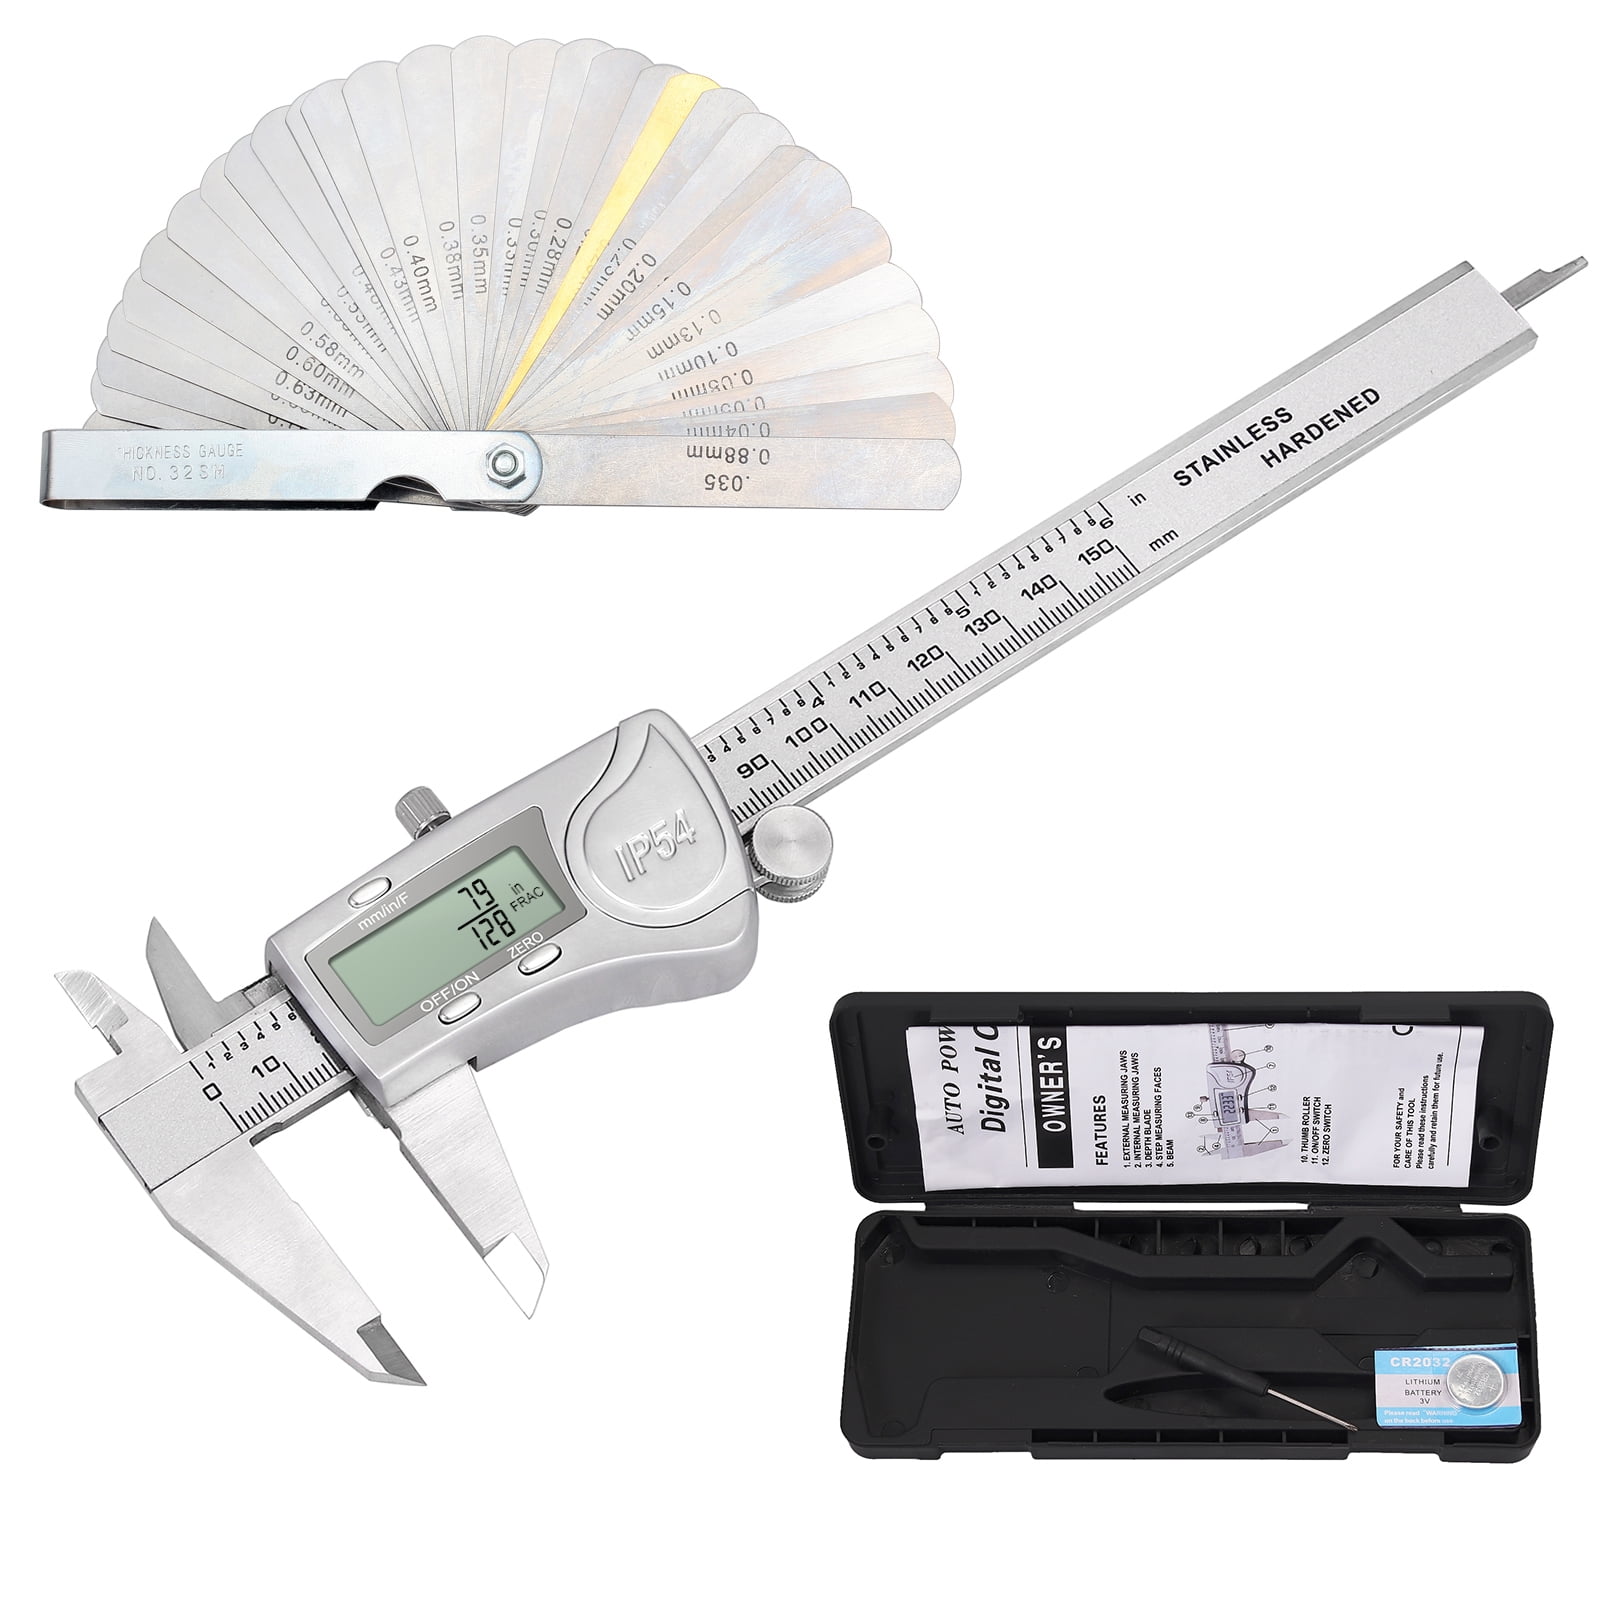 Silver eSynic Digital Vernier Caliper 150mm/6Inch Plastic Stainless Steel Electronic Caliper Fractions/Inch/Metric Conversion Measuring Tool for Length Width Depth Inner Outer Diameter 